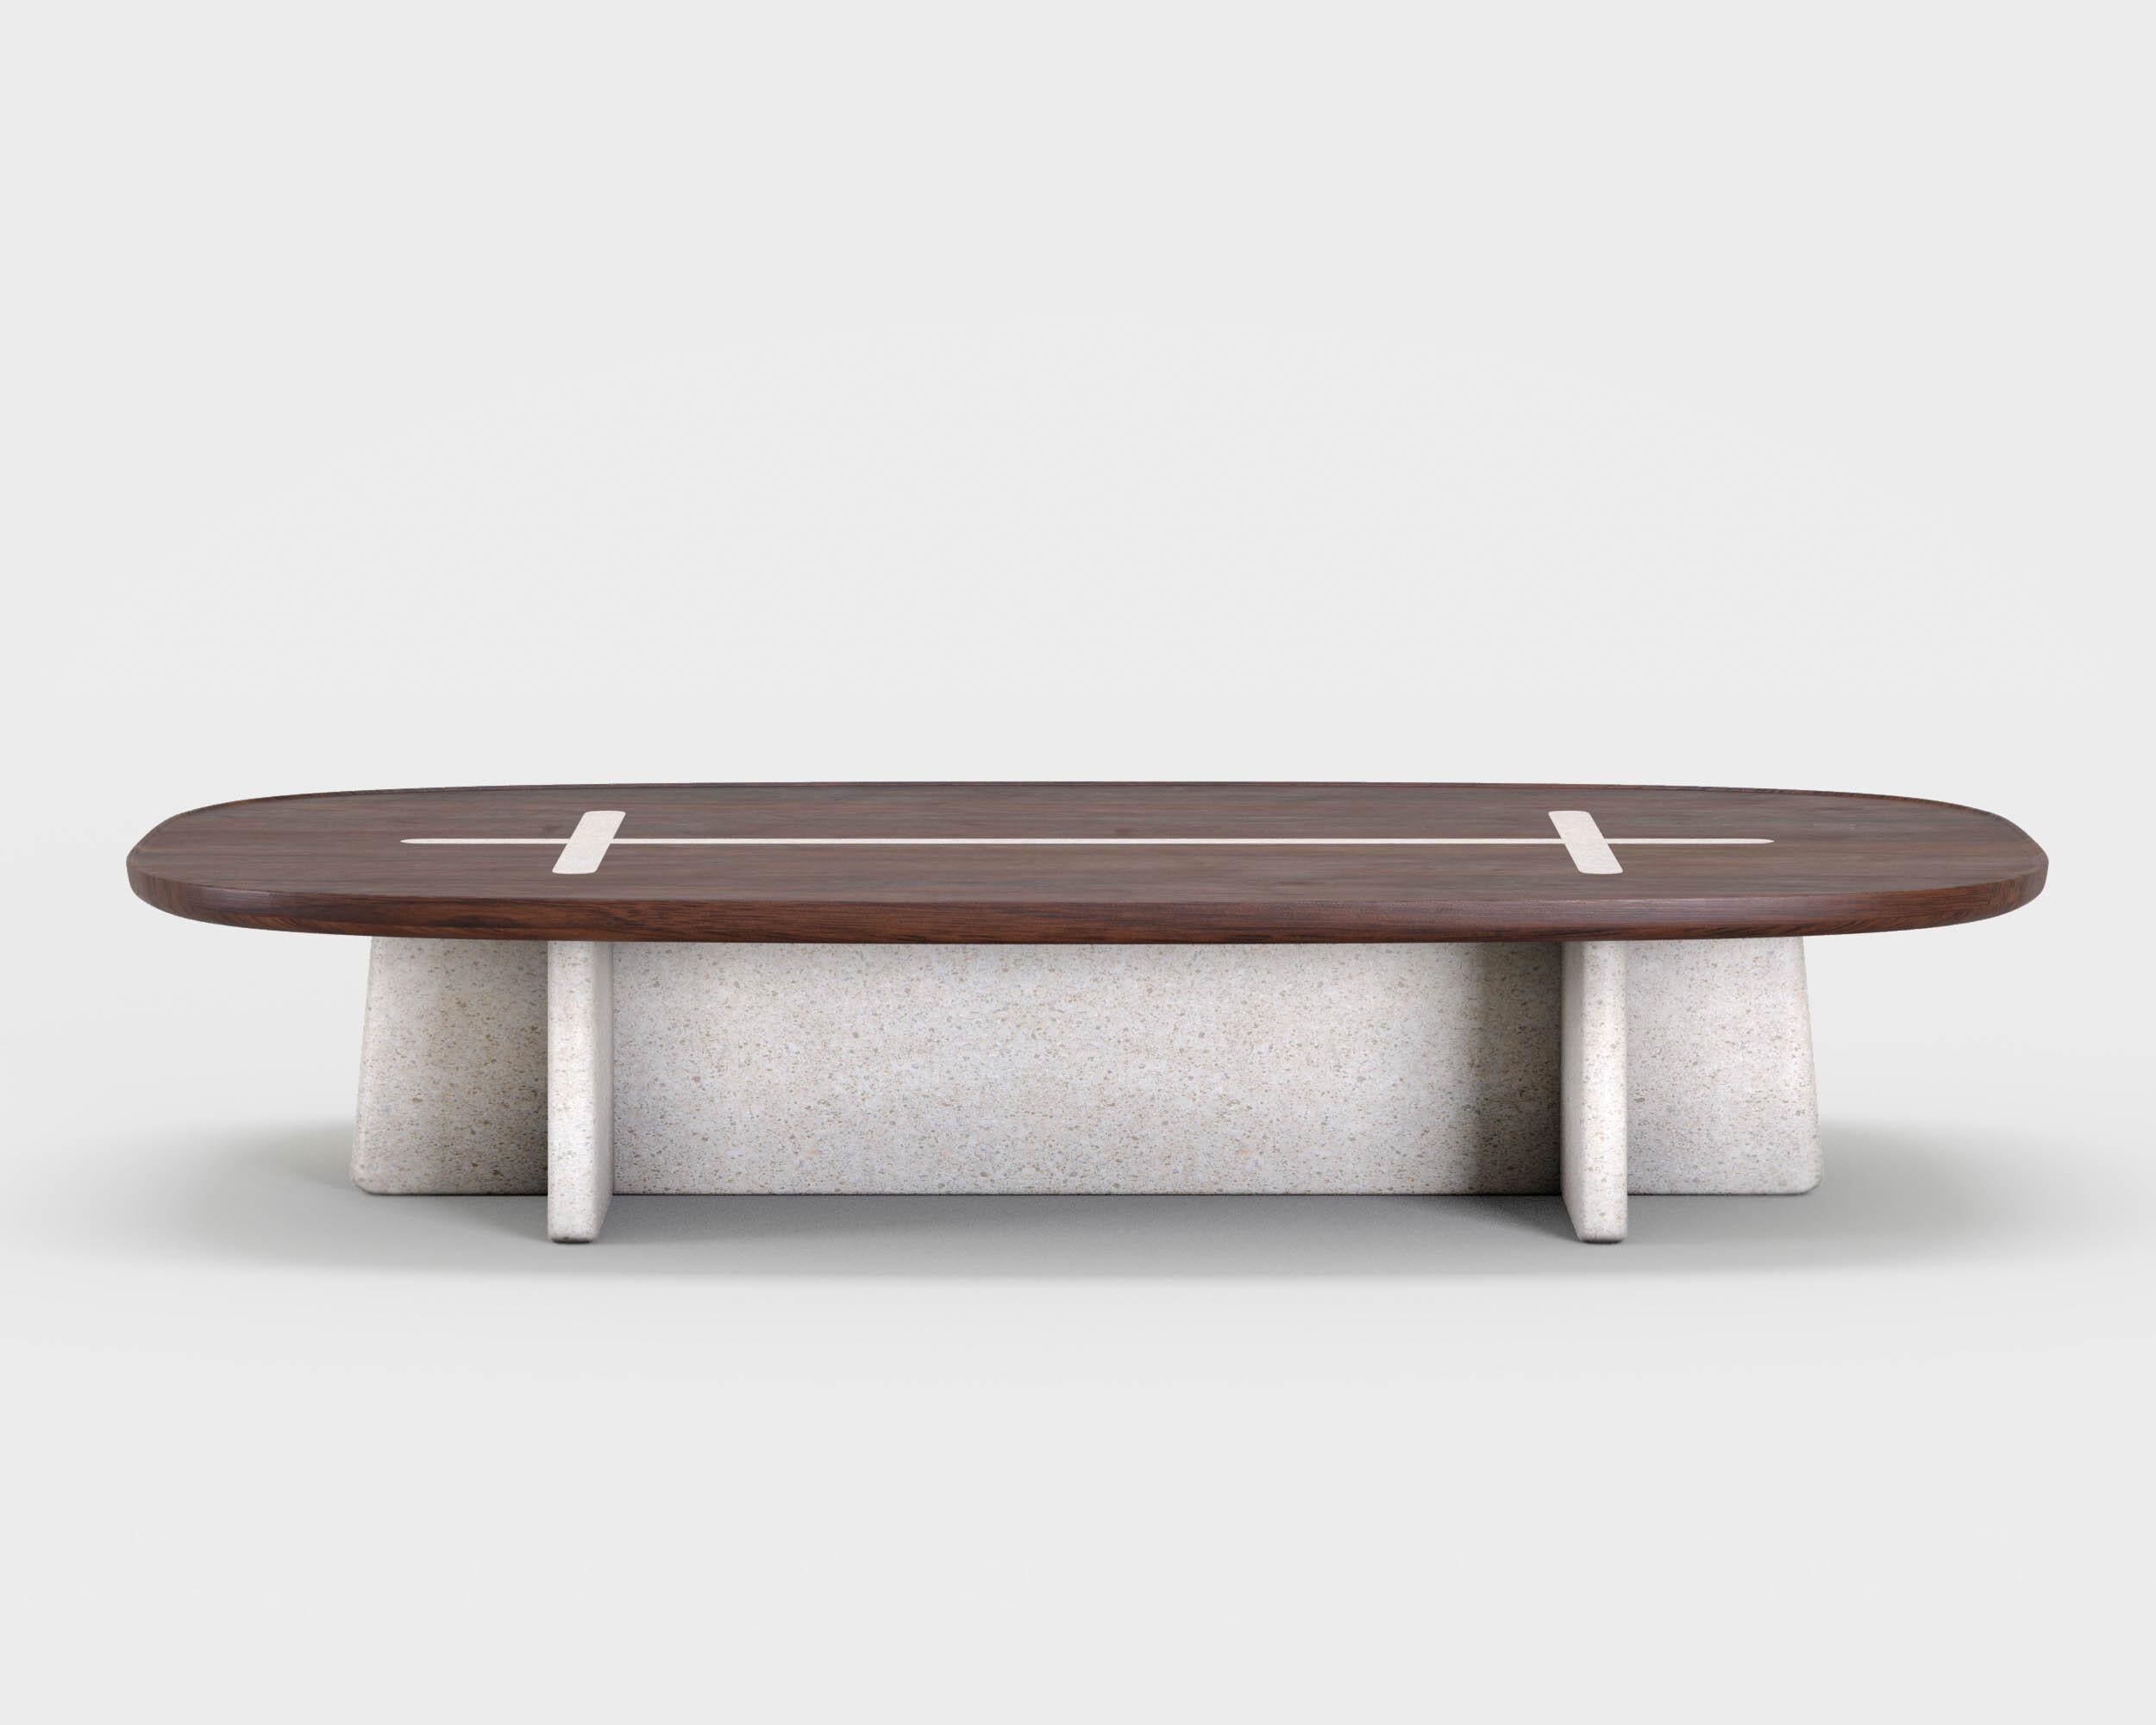 'Bleecker Street' Coffee Table by Man of Parts
Signed by Sebastian Herkner 

Solid oak wood table top available in shades: 
- Black
- Mist
- Ivory
- Nude 
- Whiskey

Stone base available in shades: 
- French sandstone
- Belgian blue limestone